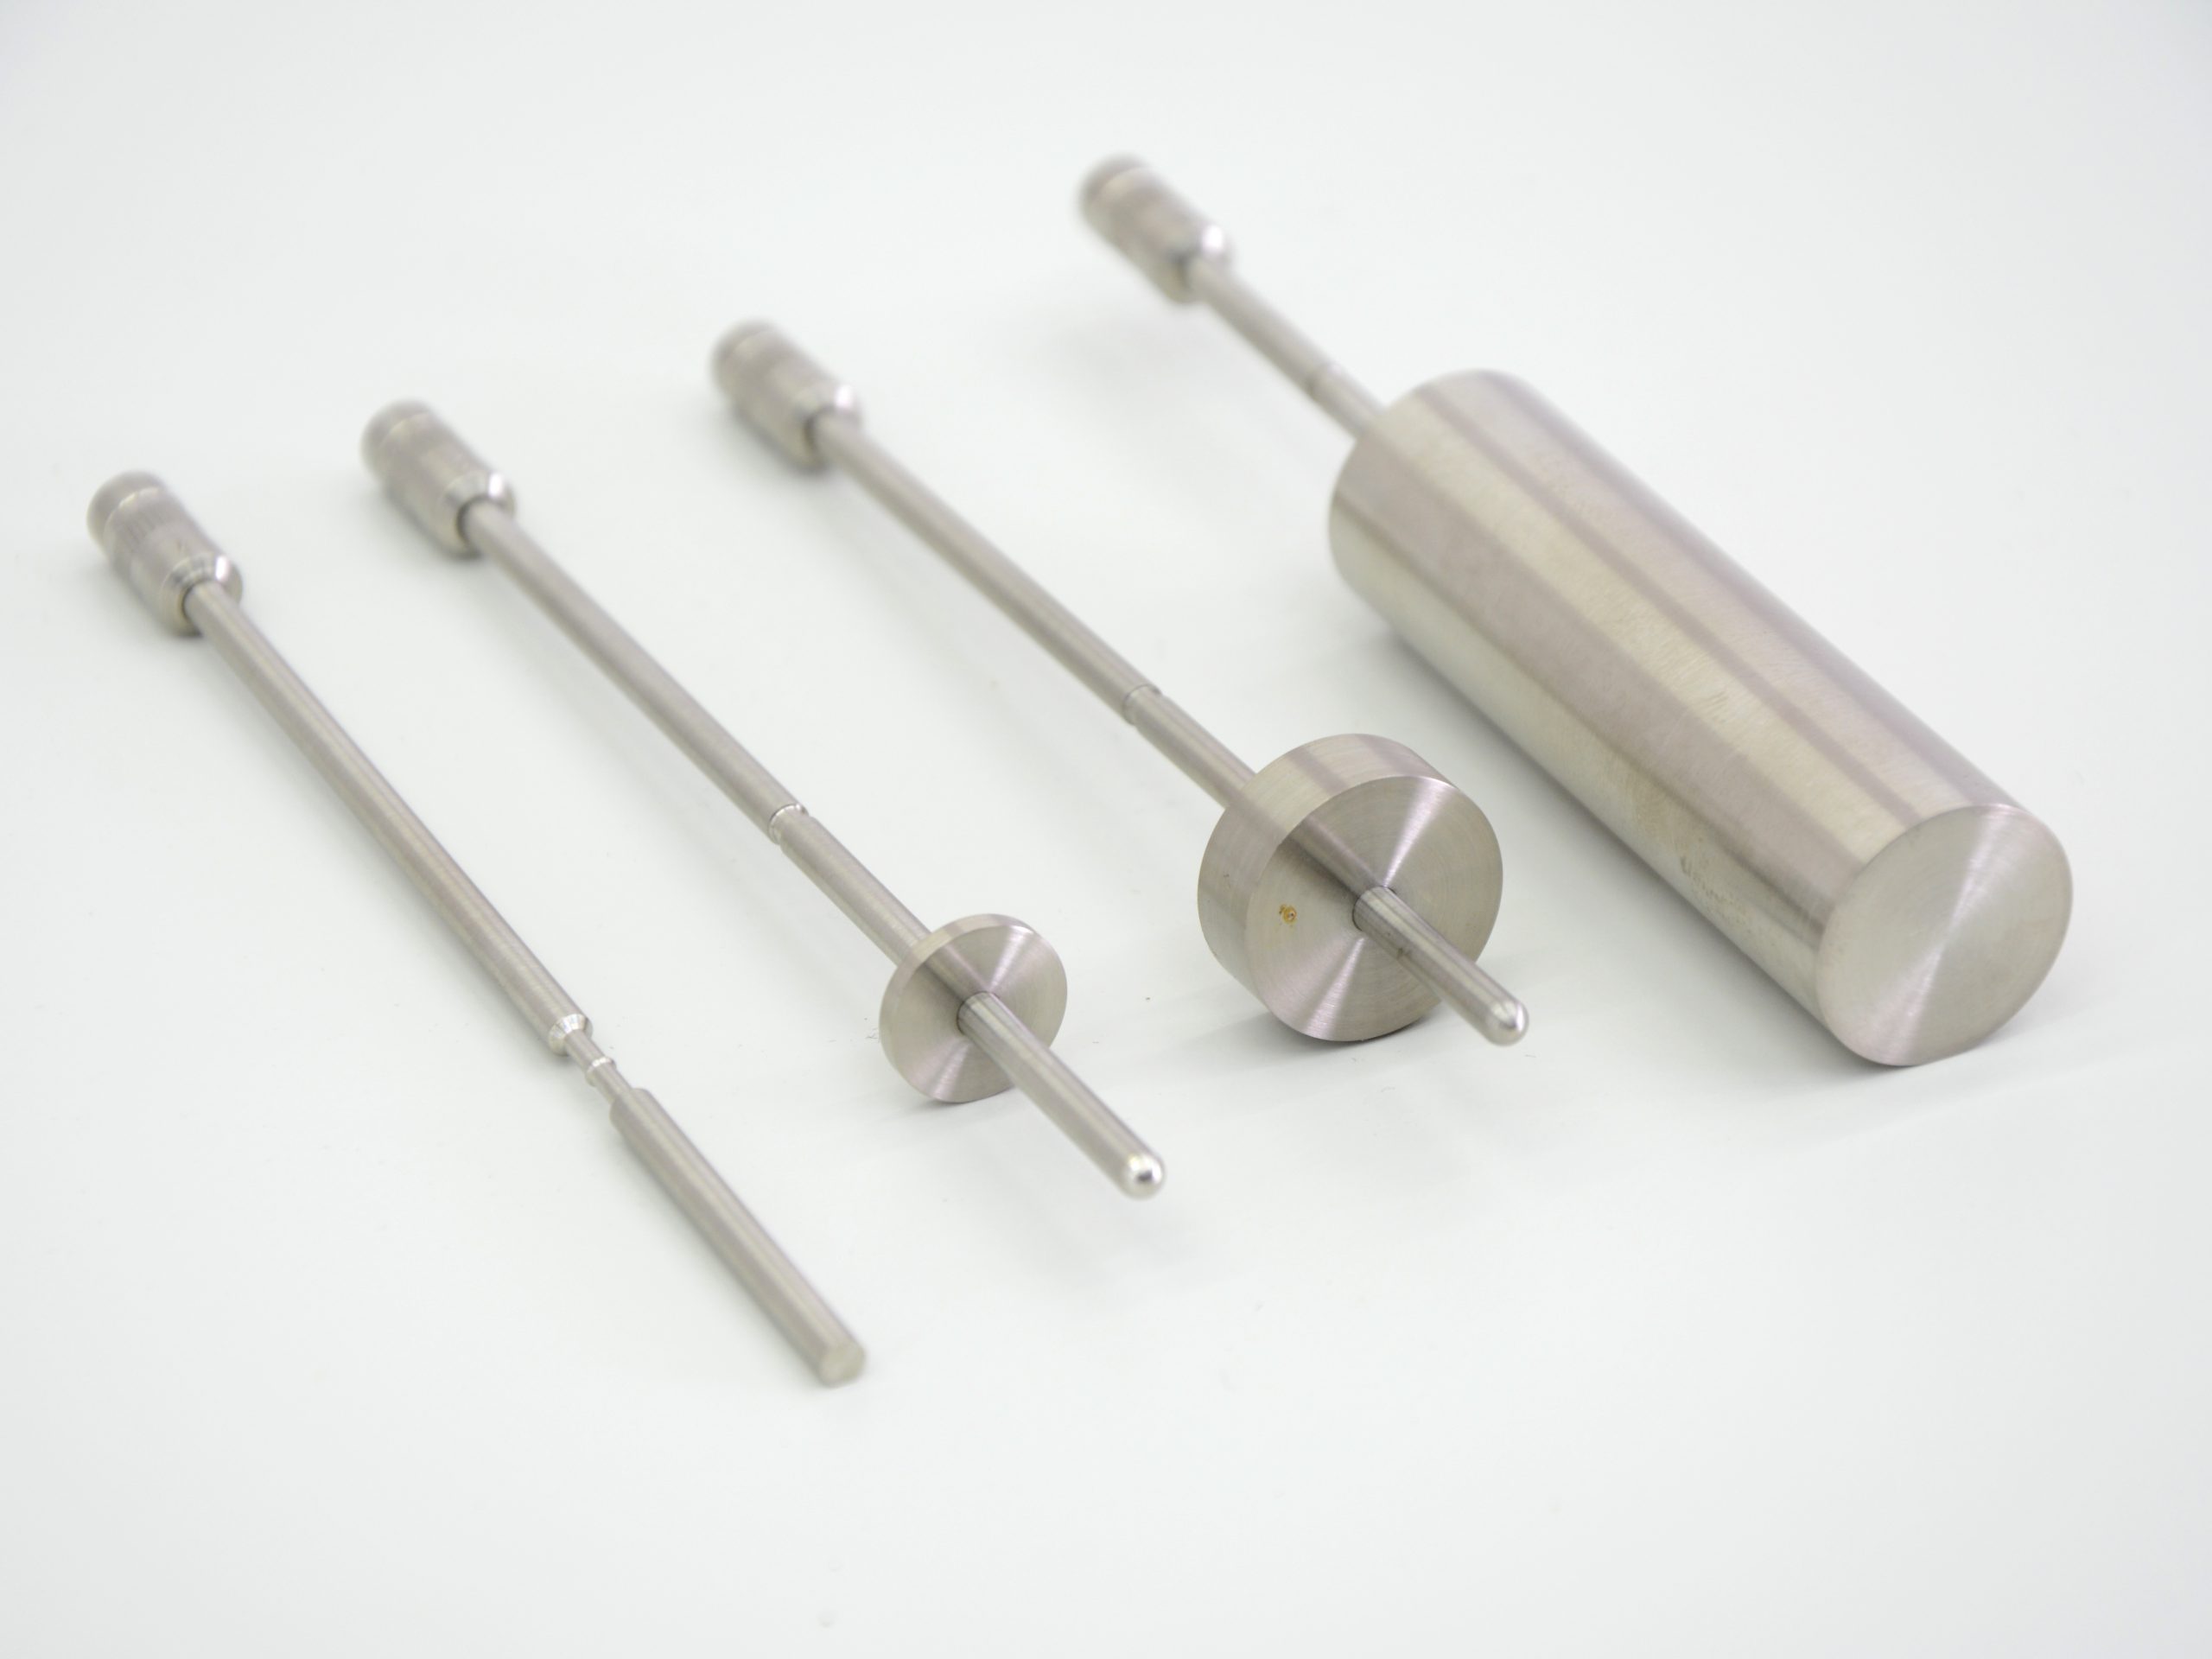 LV Spindles by Brookfield  Viscosity Measurement Accessories